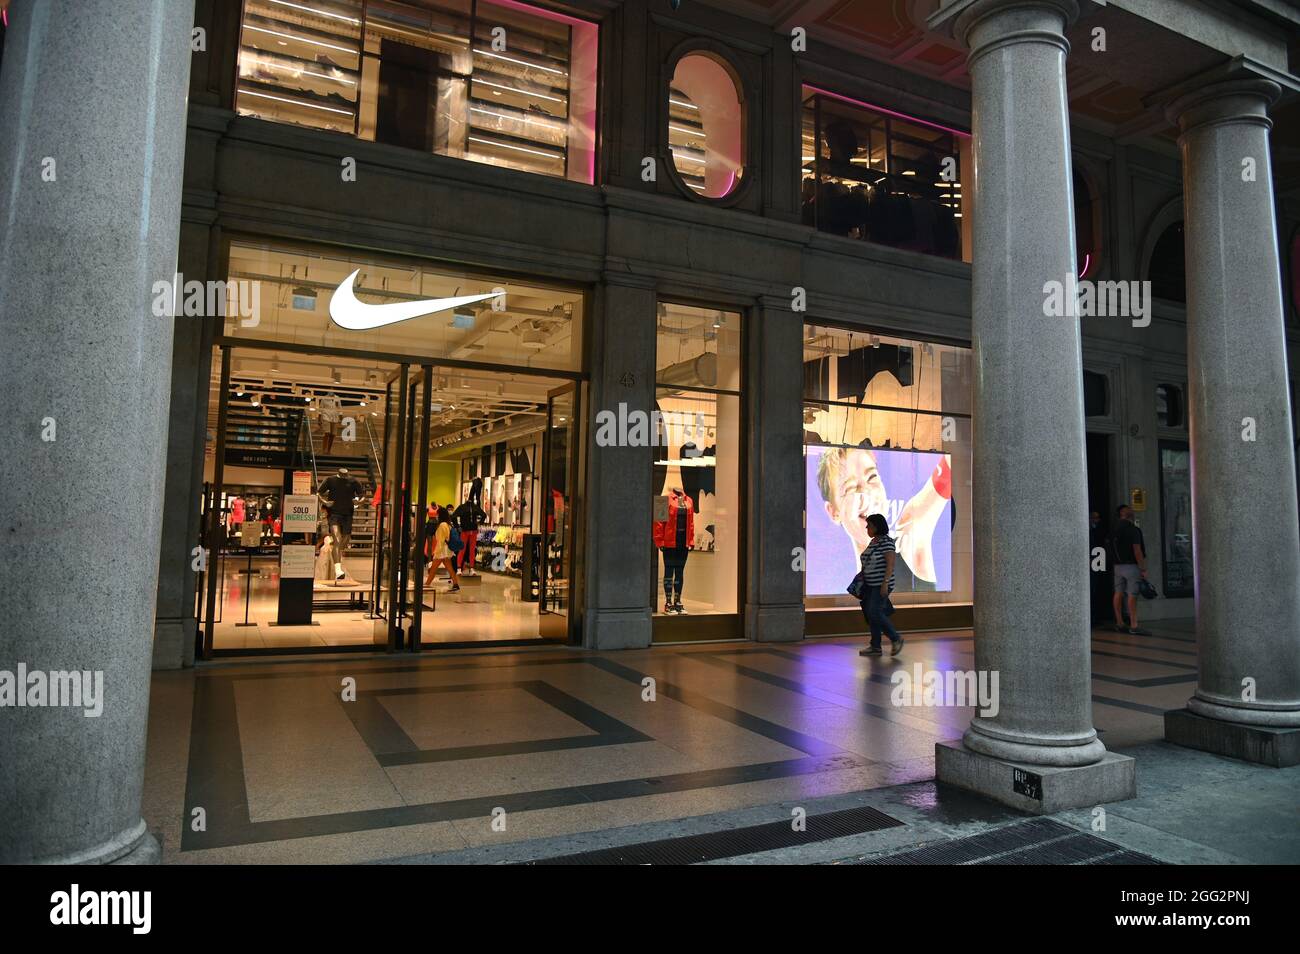 TORINO, ITALY - Aug 06, 2021: An exterior view of the "Nike" sportswear  brand shop in Turin, Italy (August 8, 2021 Stock Photo - Alamy